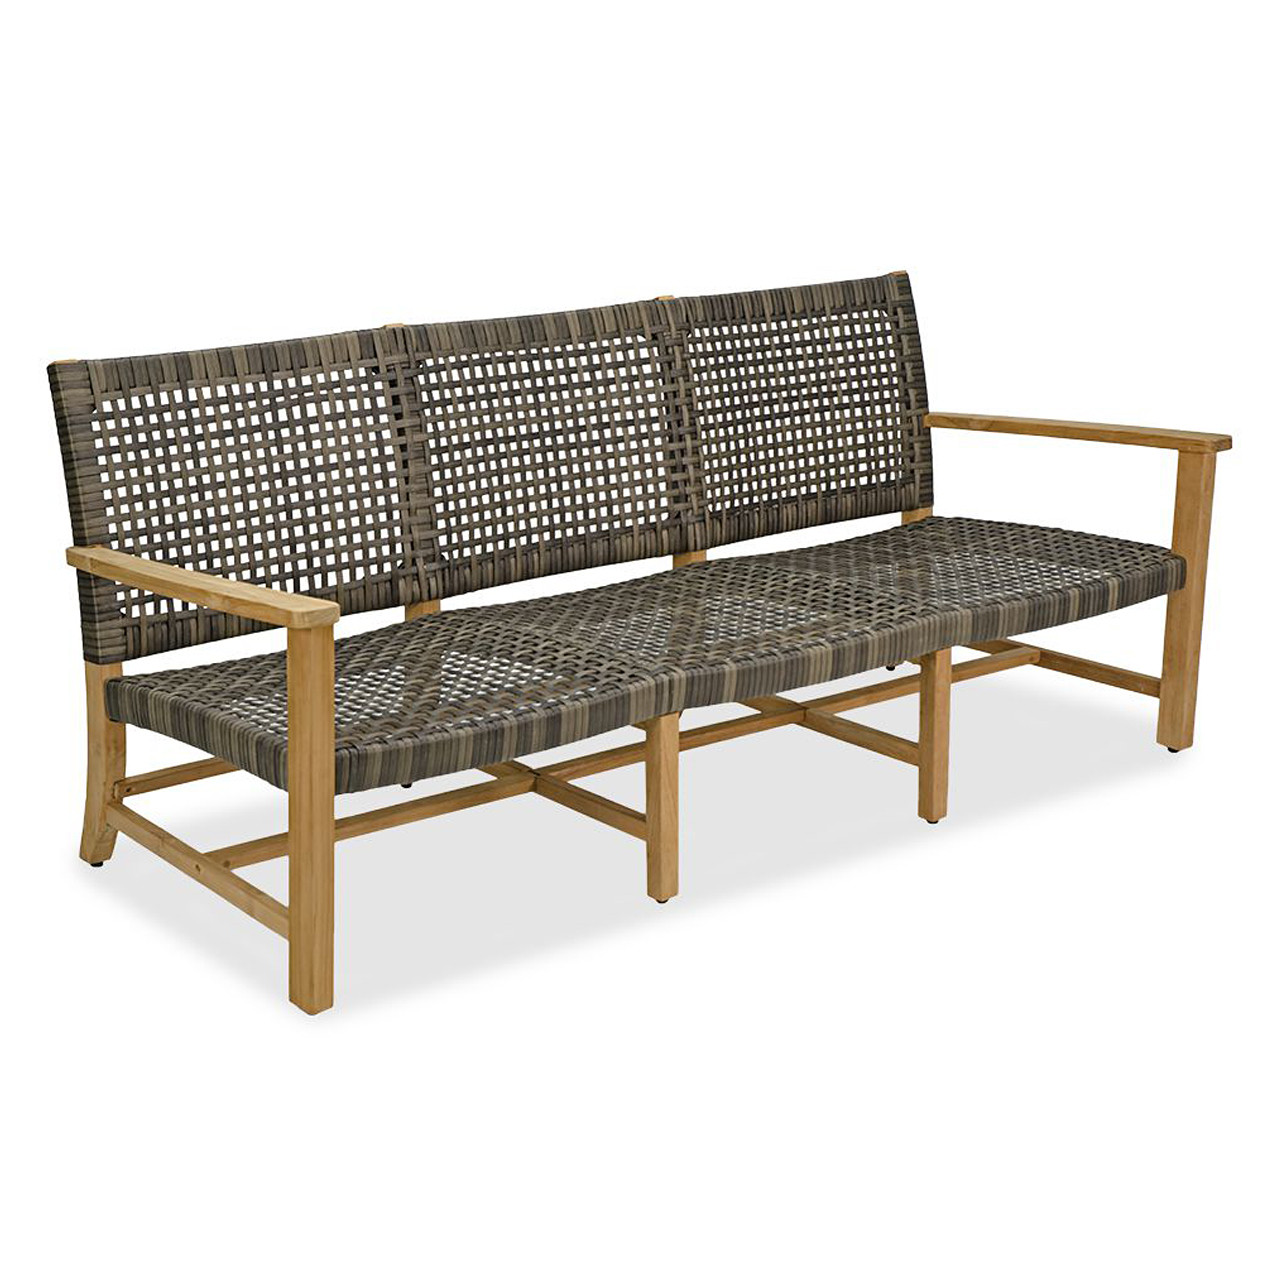 Hampton Driftwood Outdoor Wicker and Solid Teak 4 Piece Sofa Group + 55 x 31 in. Coffee Table